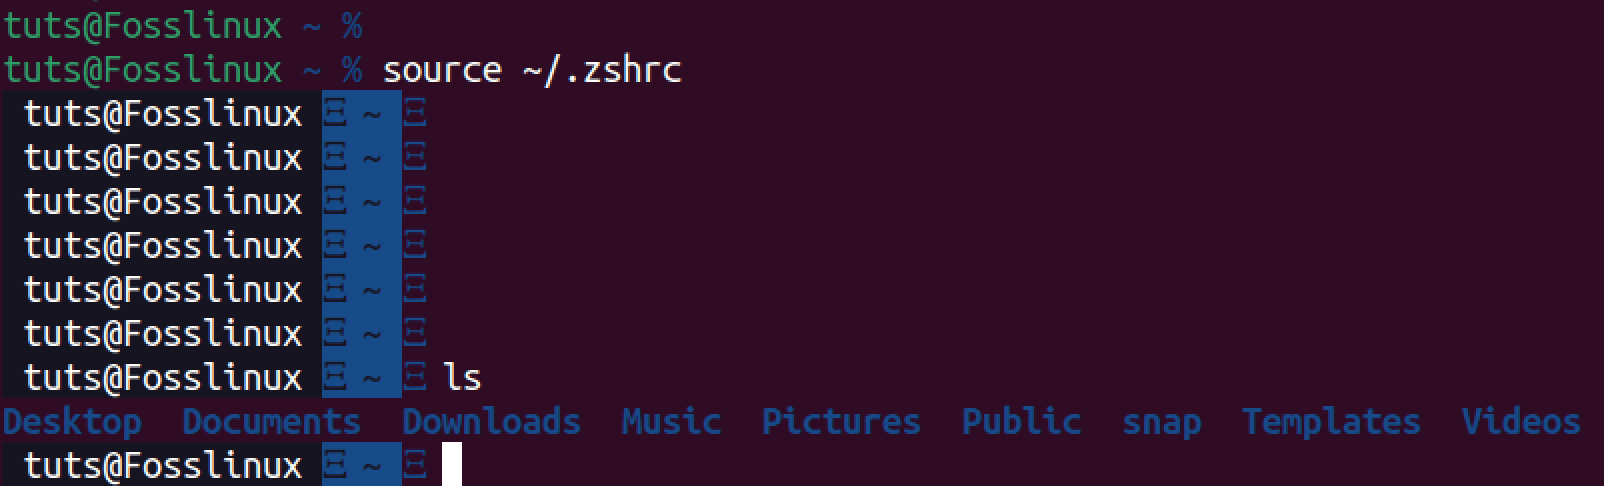 testing new oh my zsh theme